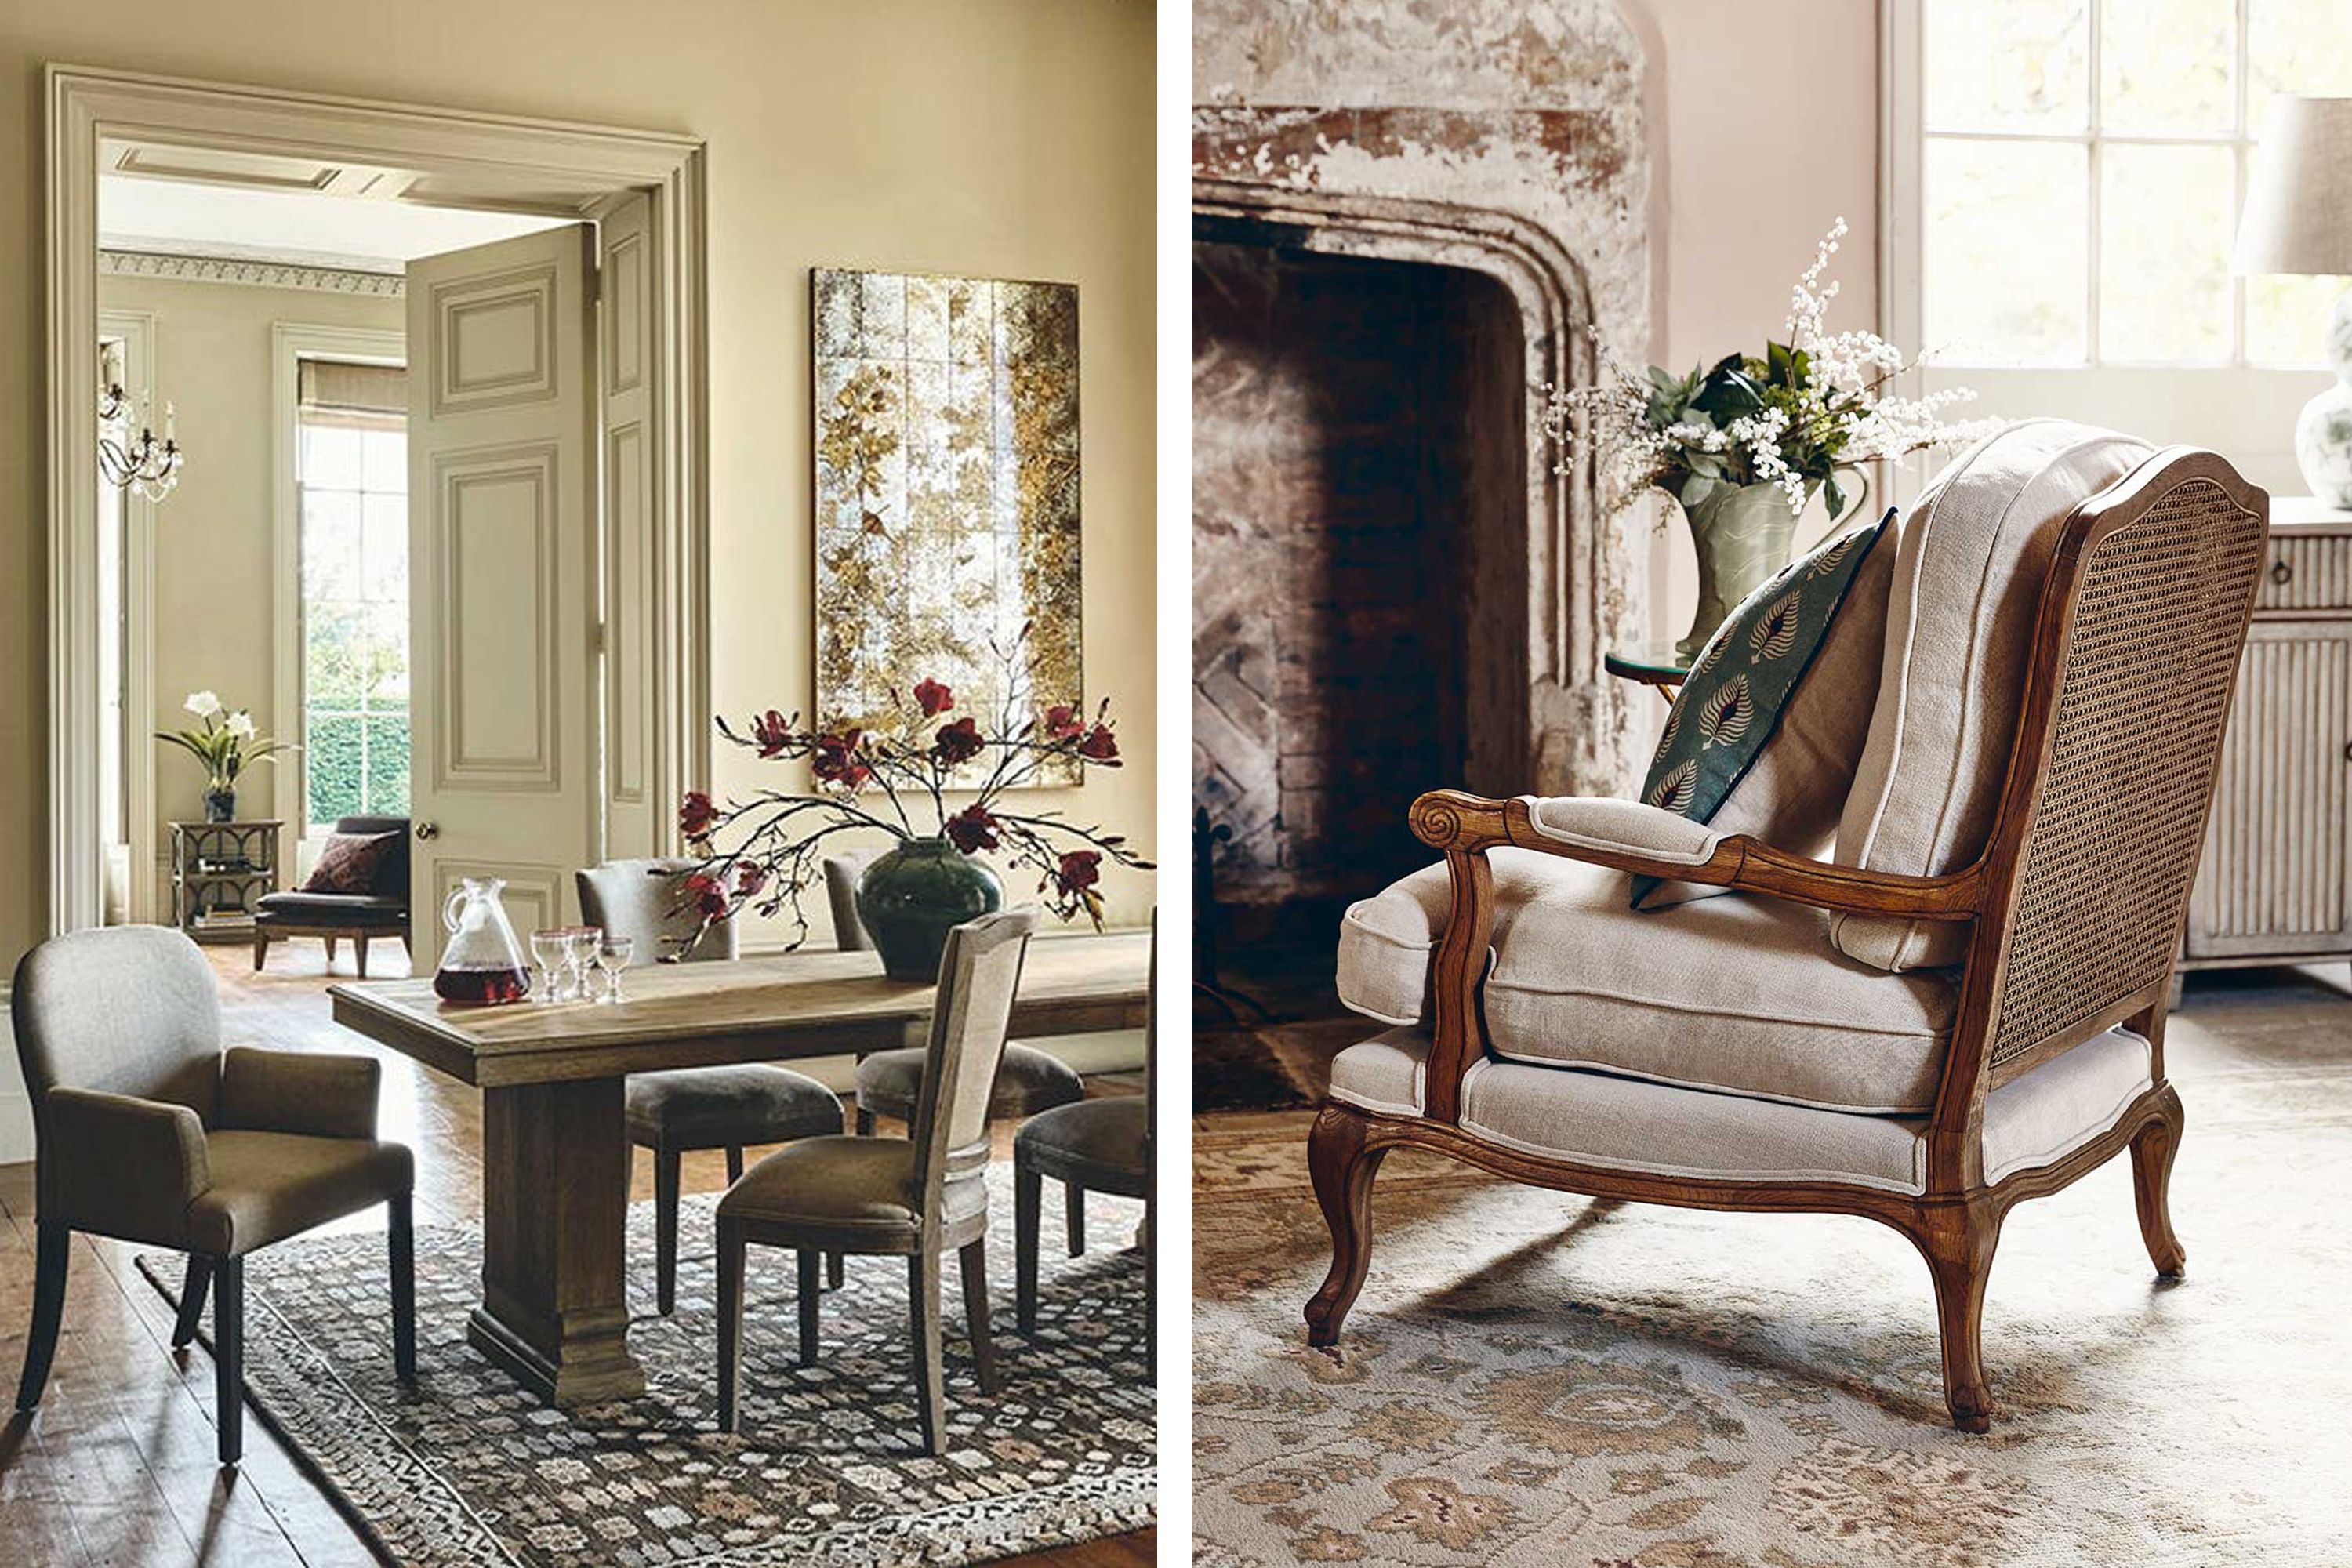 Get the look: How to recreate an English stately home interior